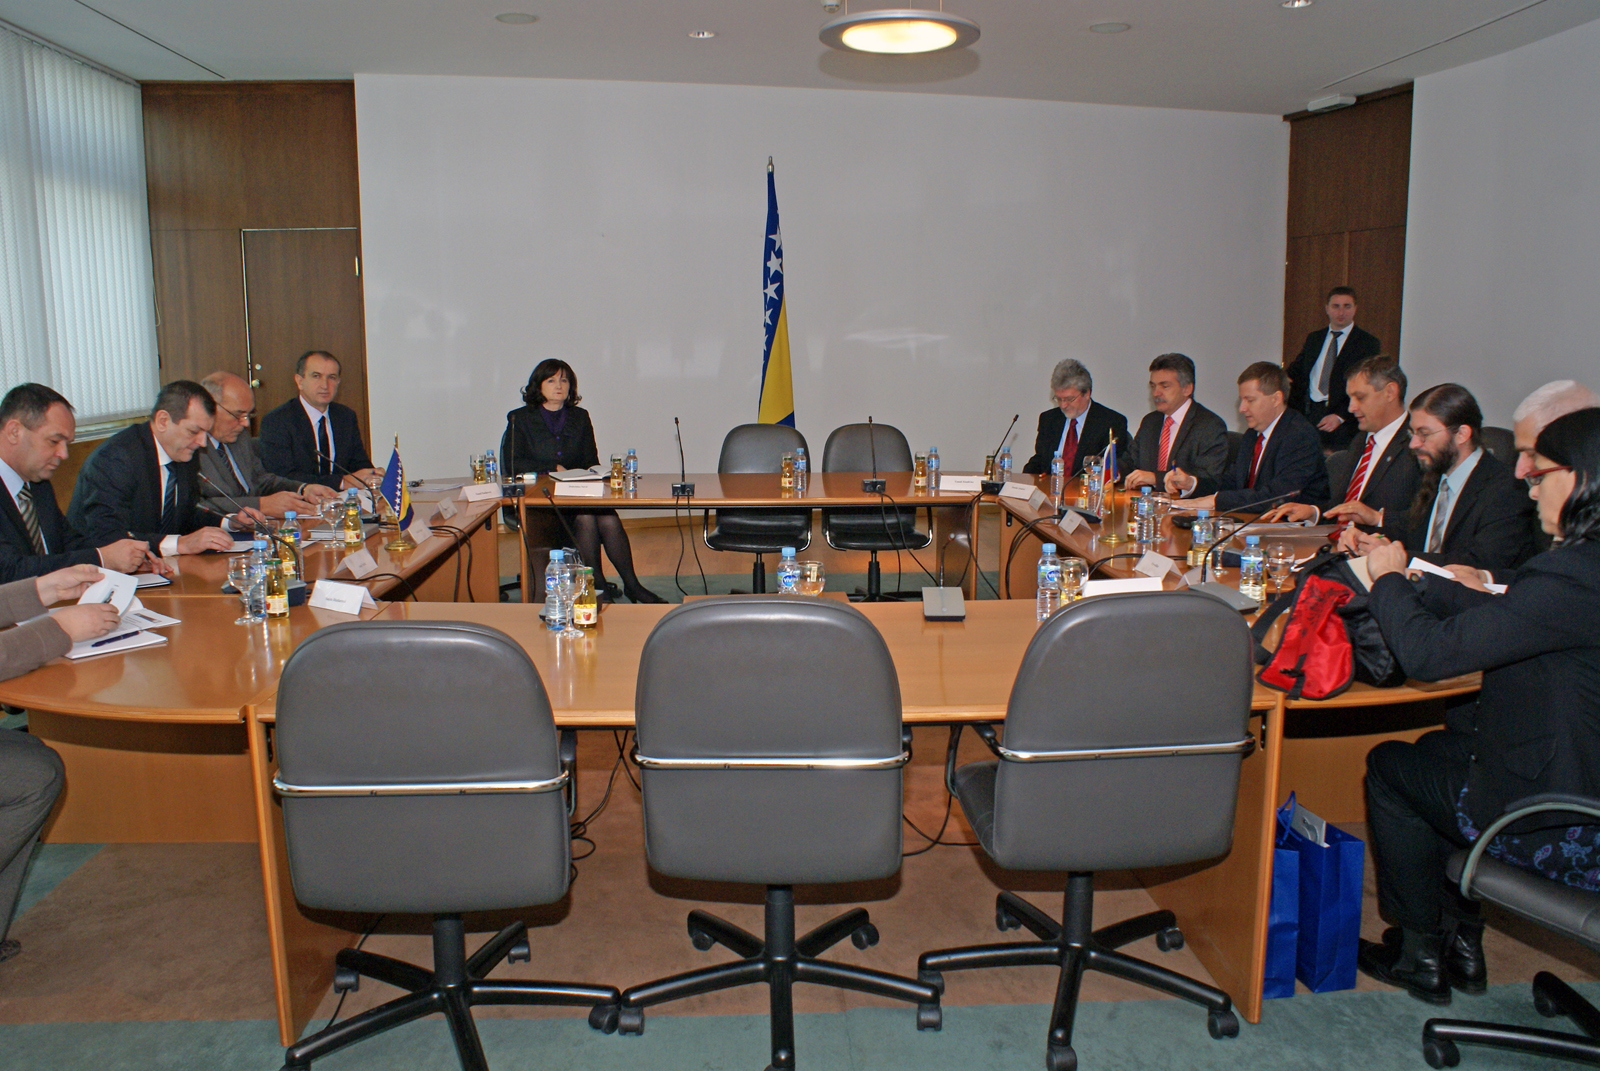 Members of the Joint Committee on Supervision of the work of the Intelligence and Security Agency of BiH, the Committee on Foreign and Trade Policy, Customs, Transportation and Communications of the House of Peoples spoke with the delegation of the Senate of the Czech Republic